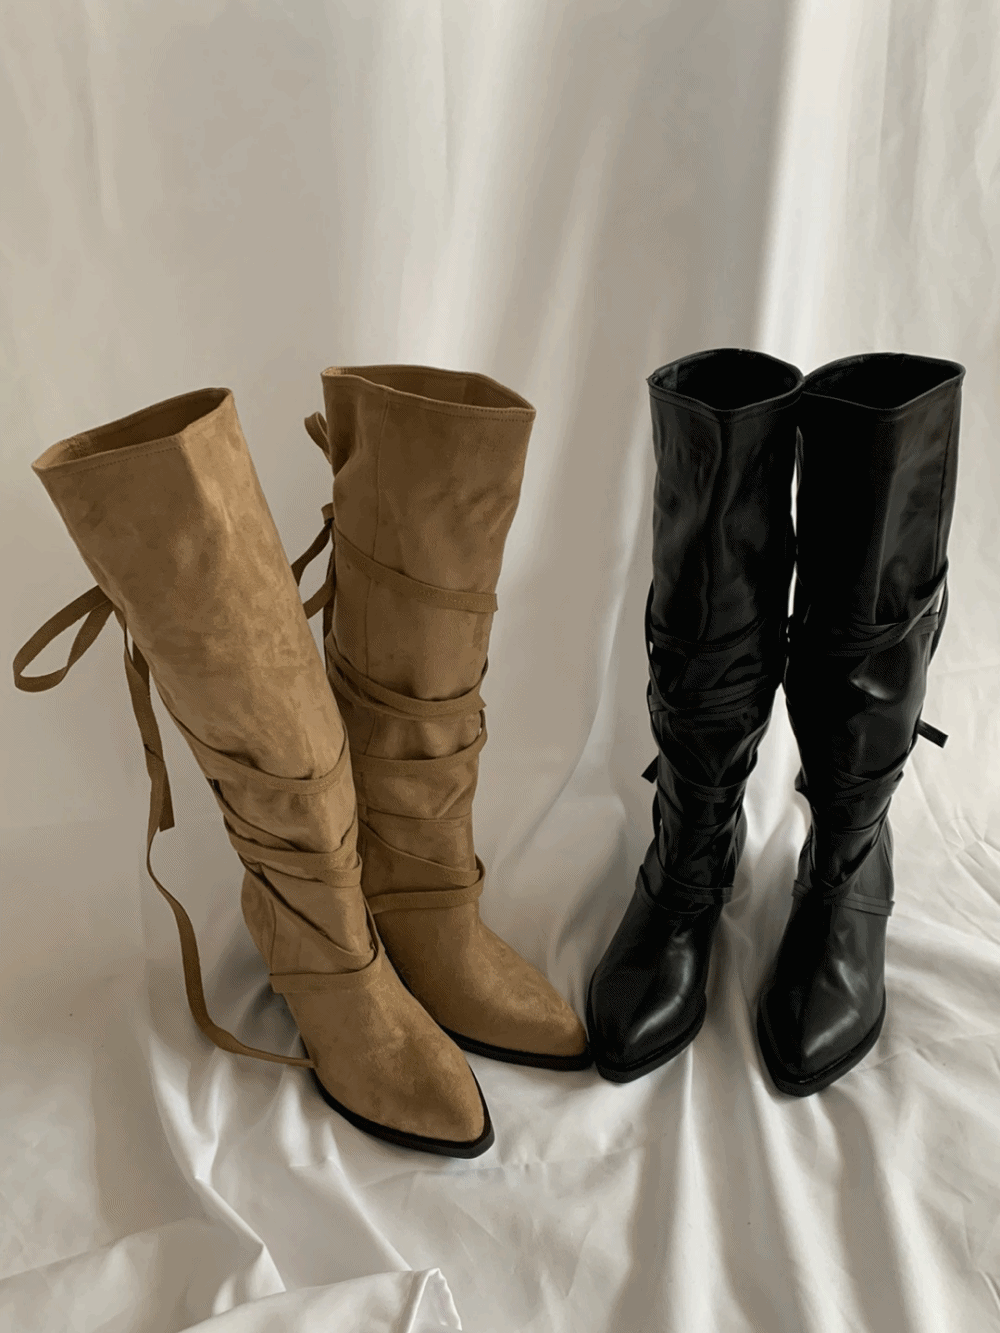 [Shoes] Glam Lace-up Strap Boots / 2 colors